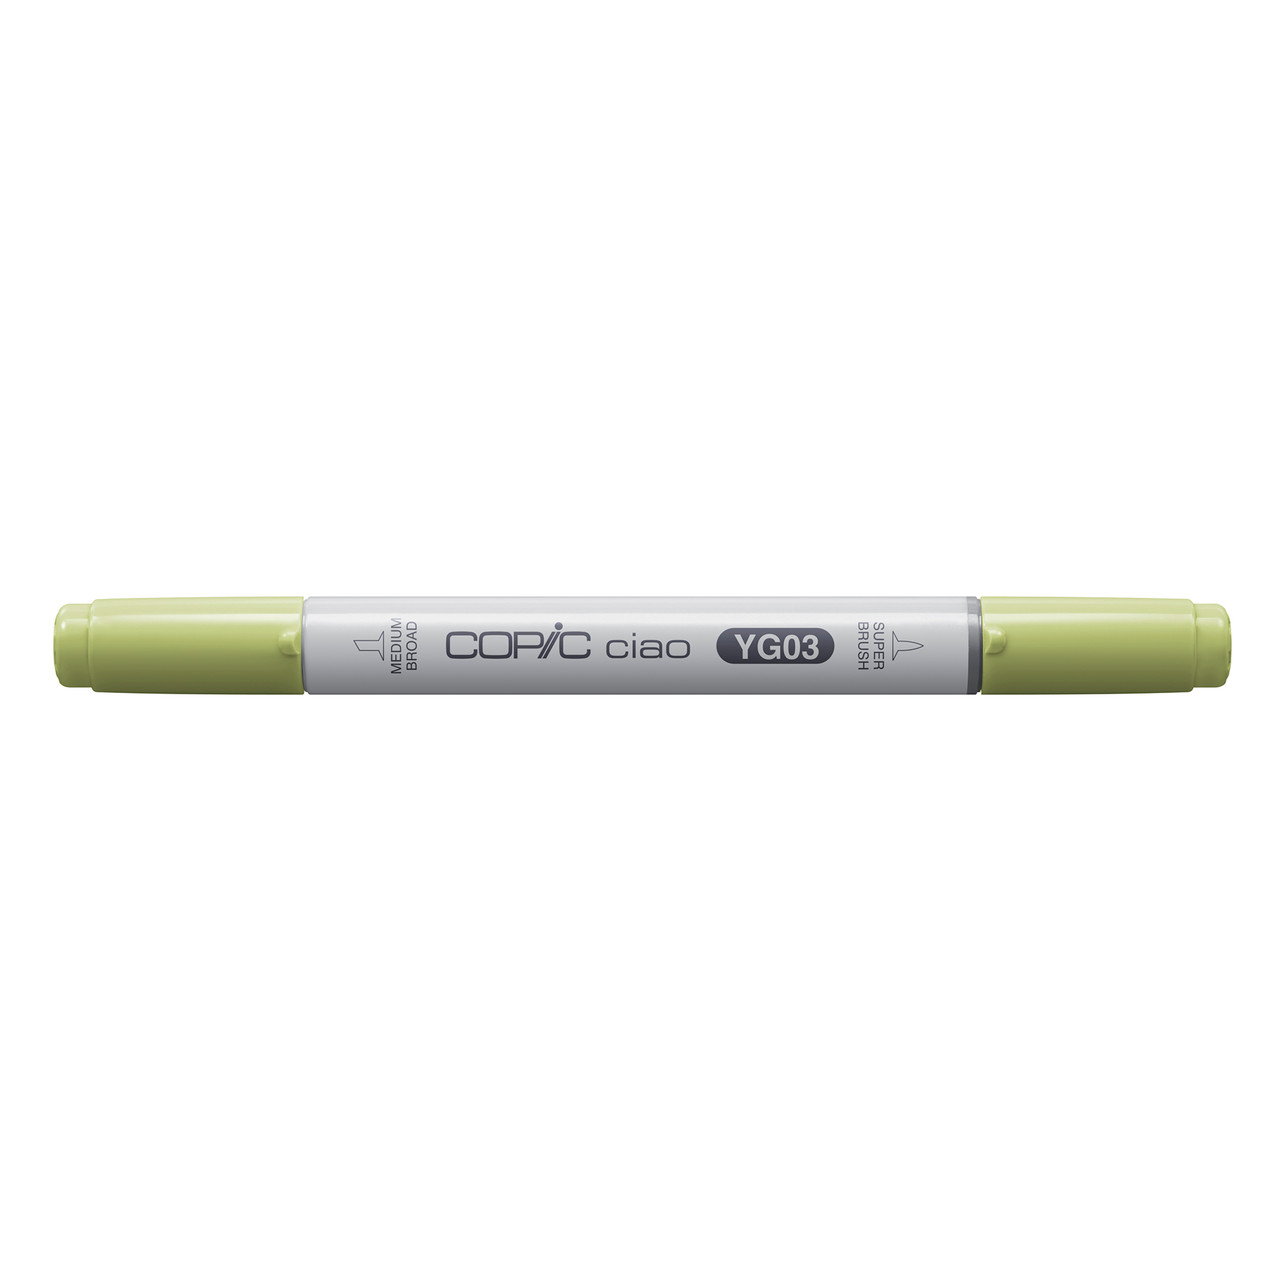 Copic Ciao Marker Yellow Green YG03